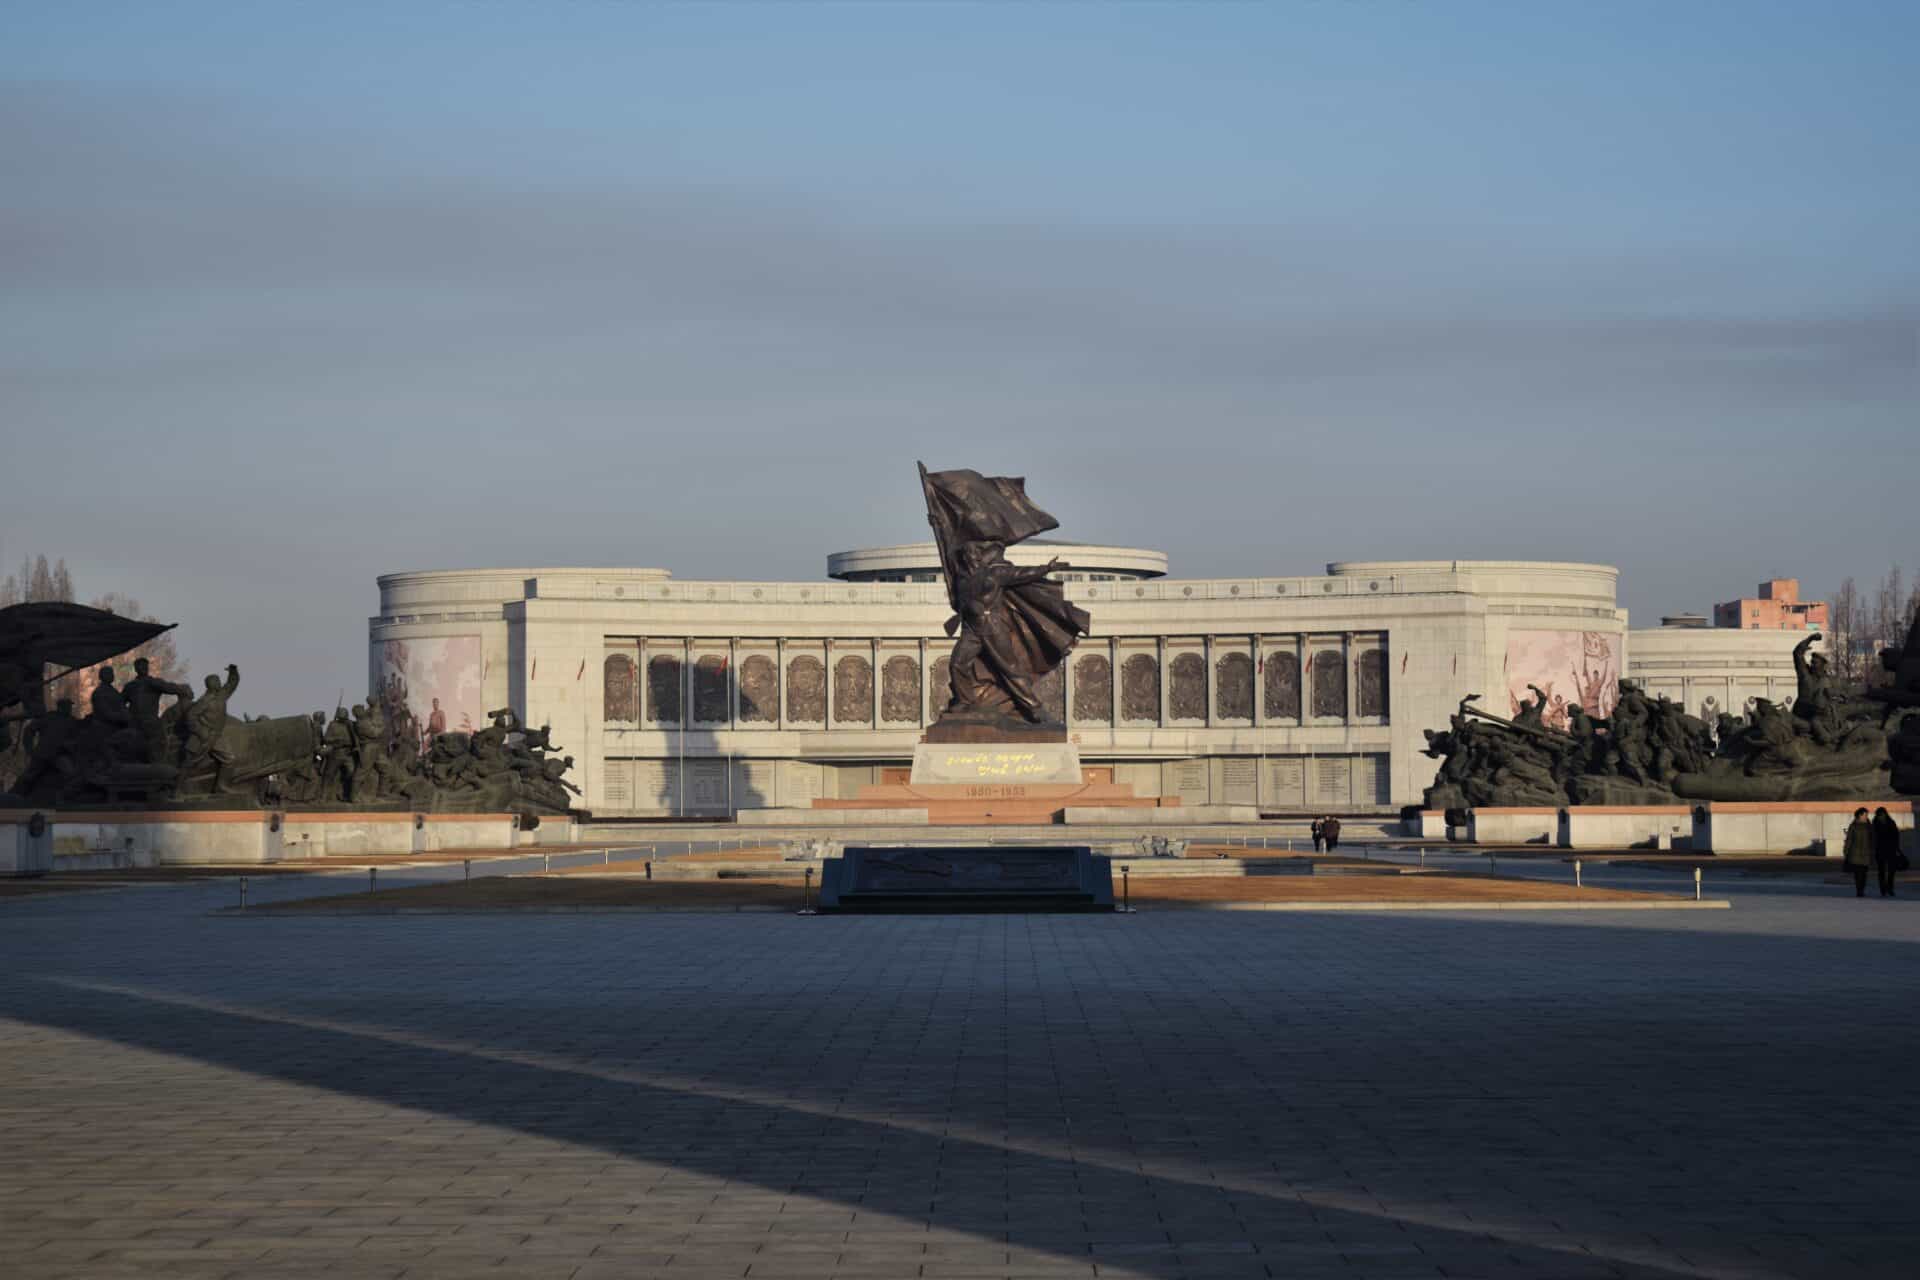 massive statue of a North Korean soldier waving a flag in front of the Victorious War Museum in Pyongyang